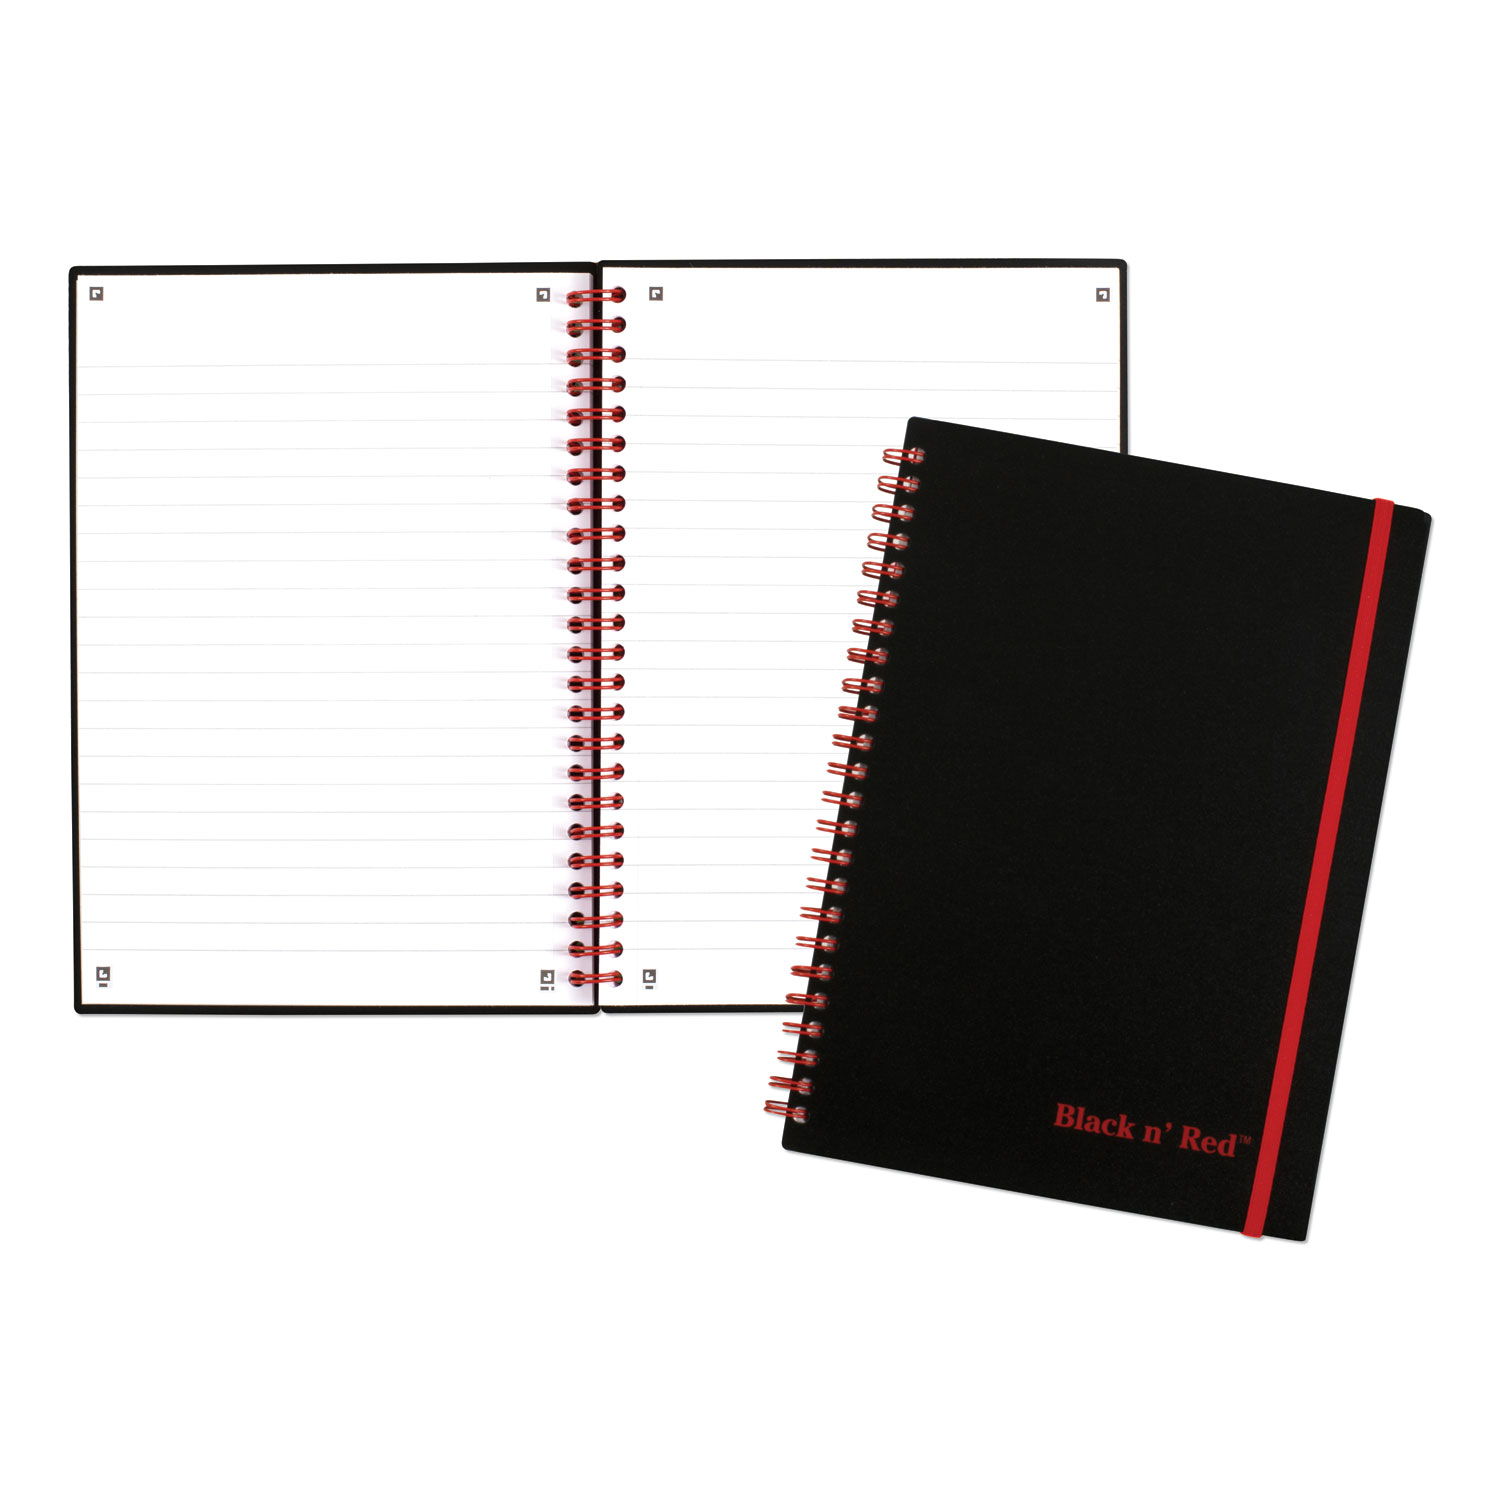  Black n' Red C67009 Twin Wire Poly Cover Notebook, Wide/Legal Rule, Black Cover, 8.25 x 5.68, 70 Sheets (JDKC67009) 